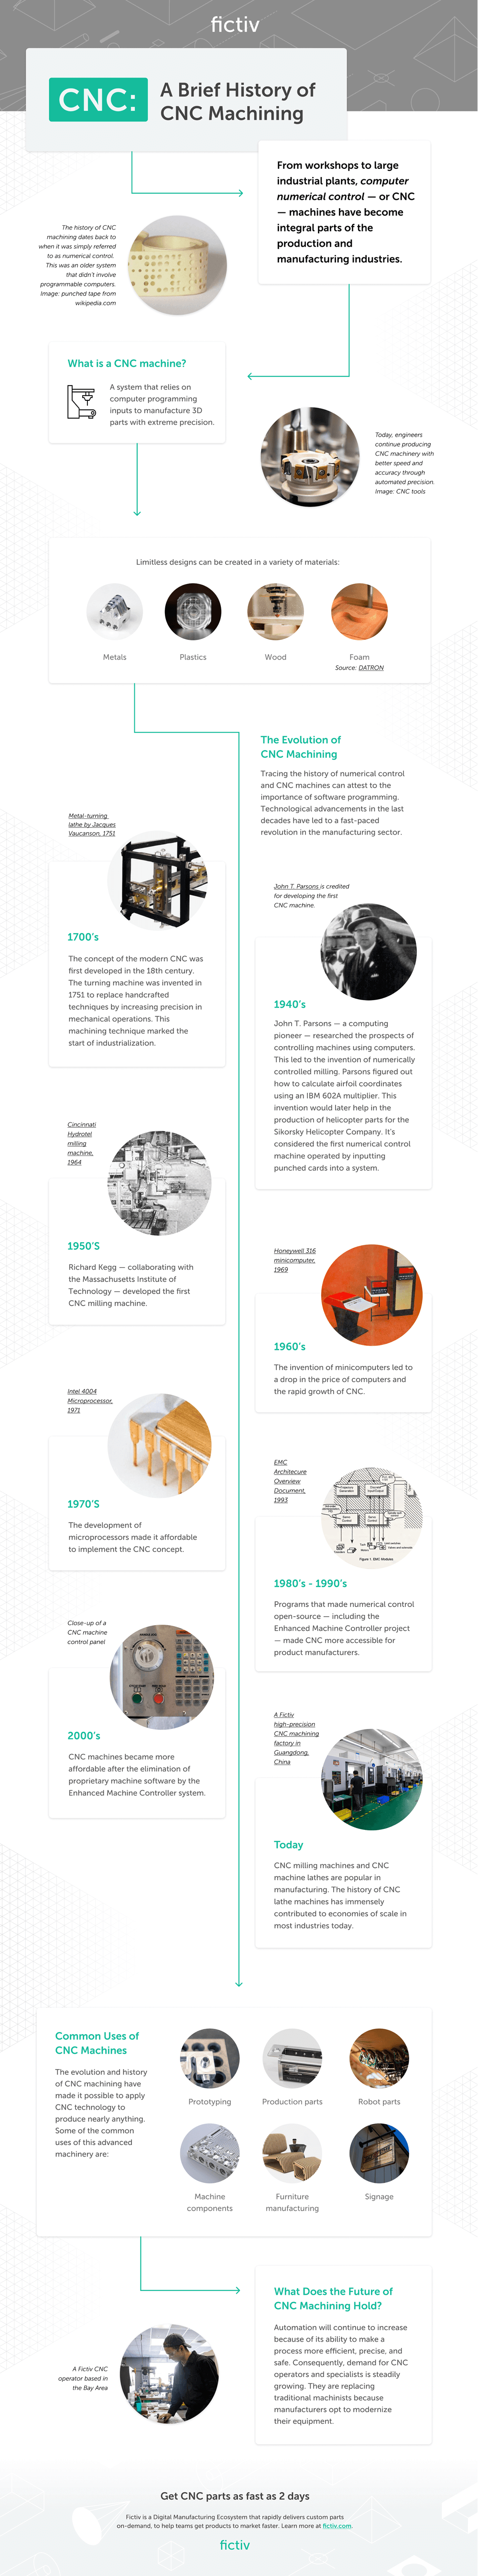 The History of CNC Infographic